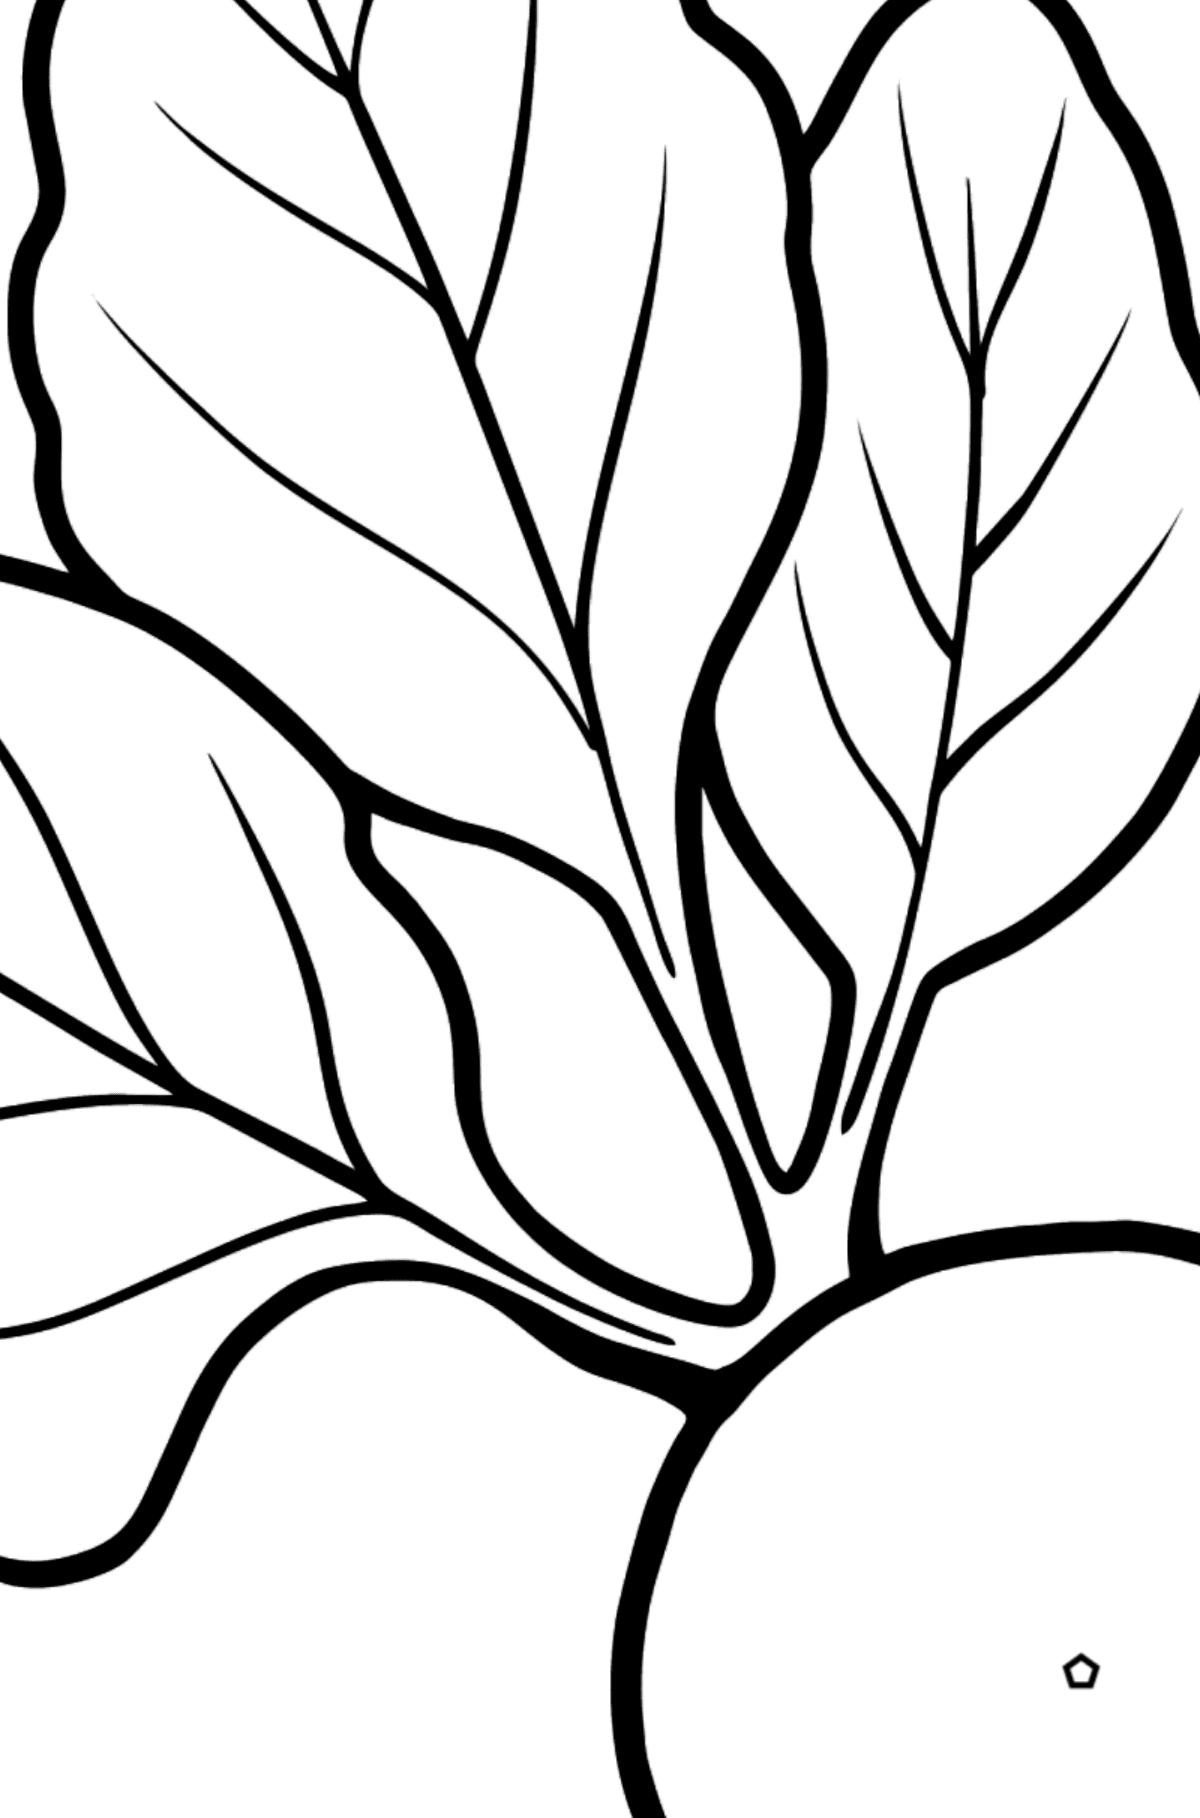 Beet coloring page - Coloring by Symbols and Geometric Shapes for Kids